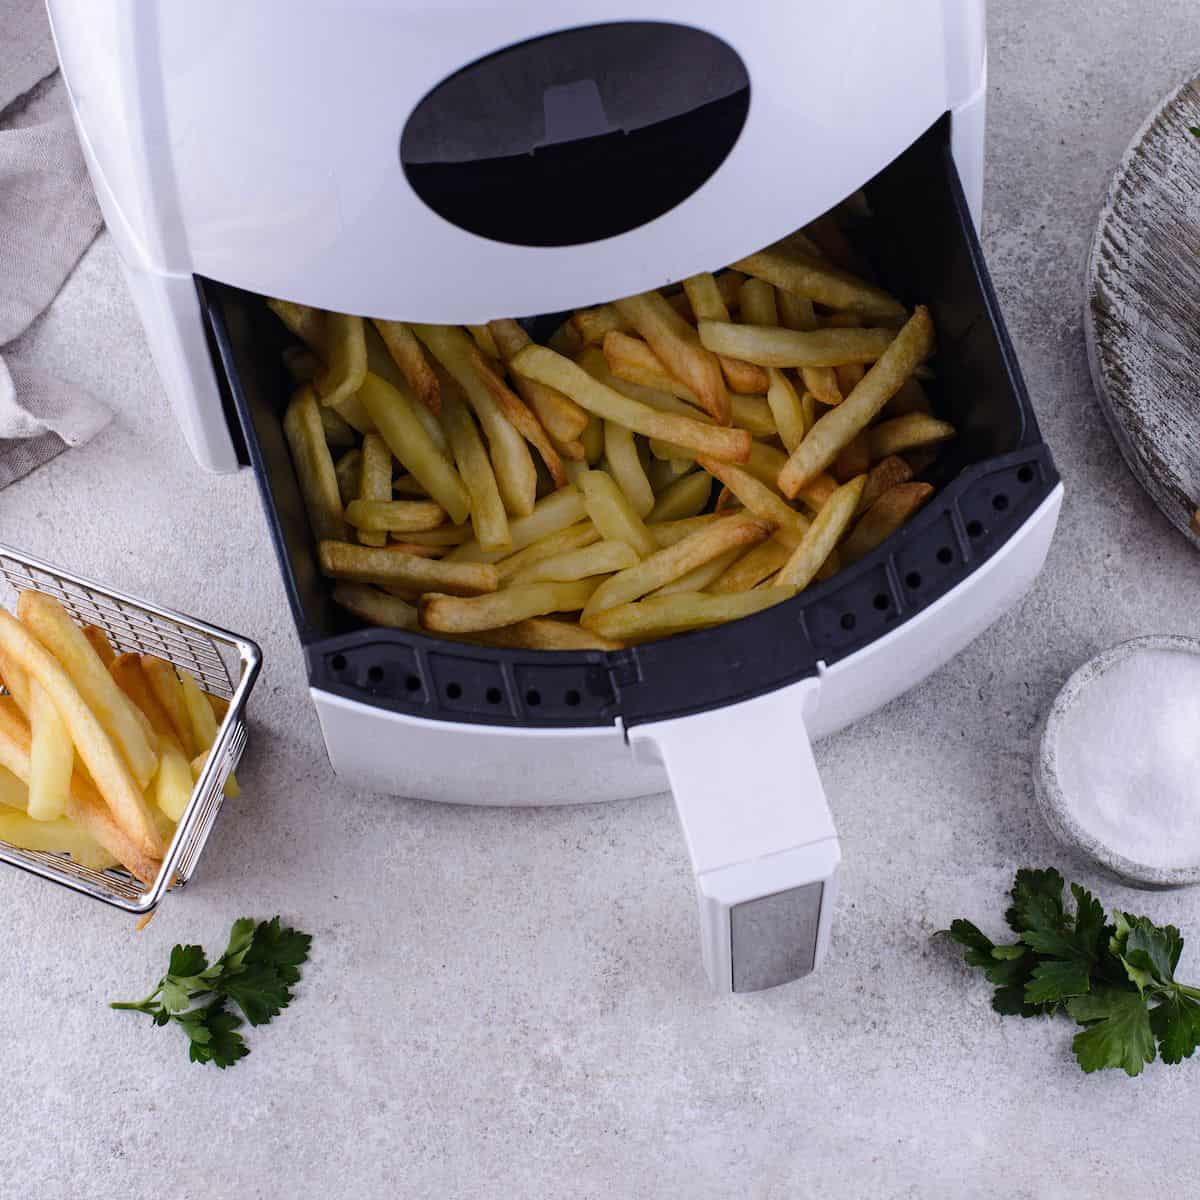 should i buy a new air fryer or used